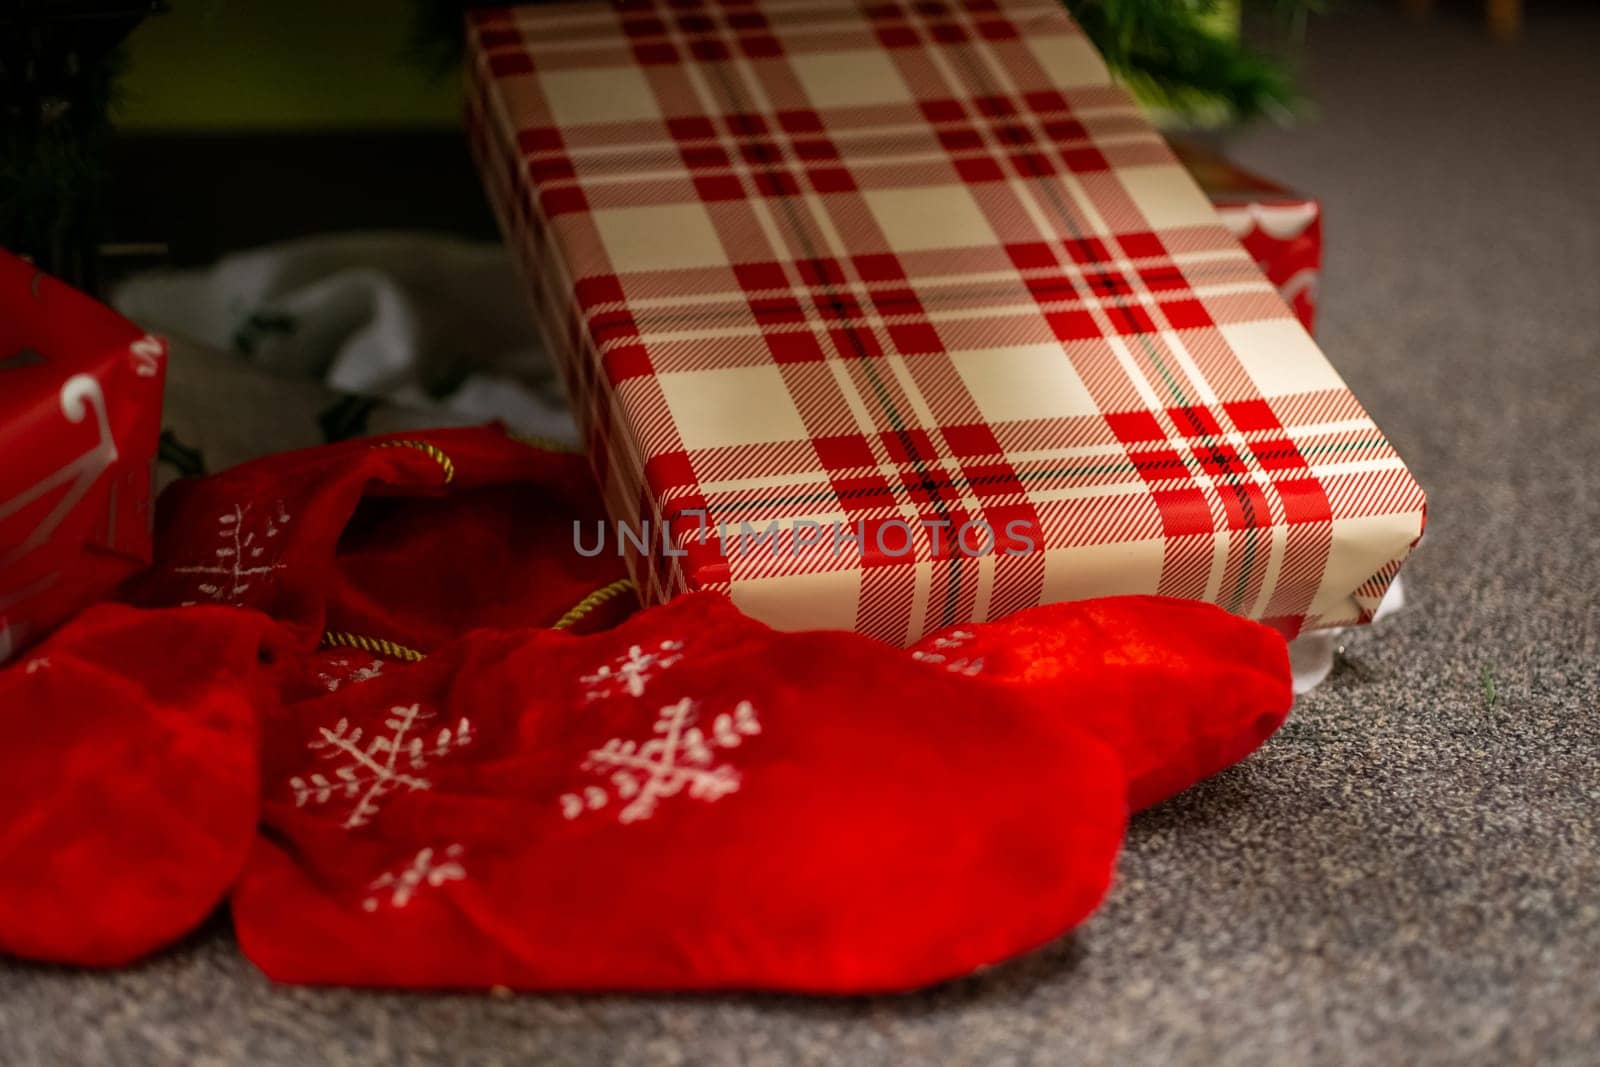 Christmas gifts laying on the floor under fir tree branches